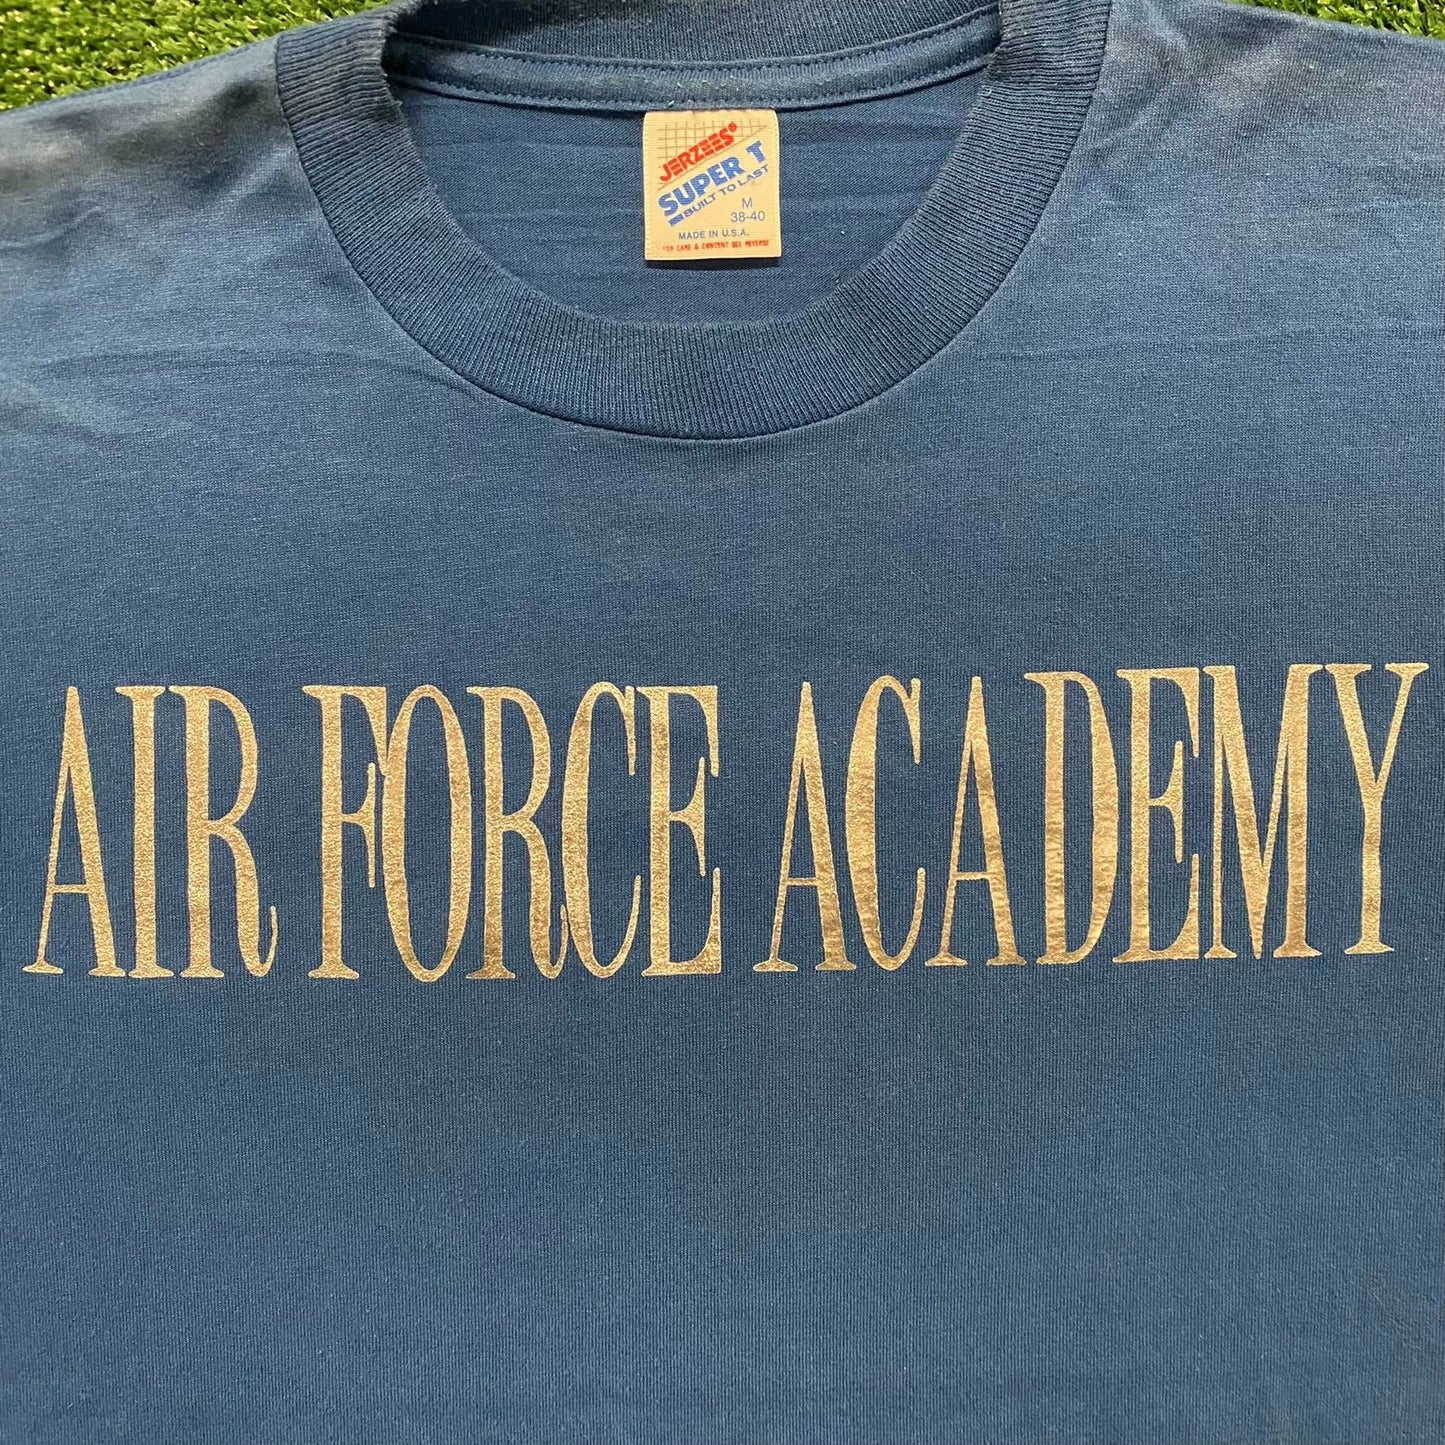 Vintage 80s US Air Force Academy Military Single Stitch Tee